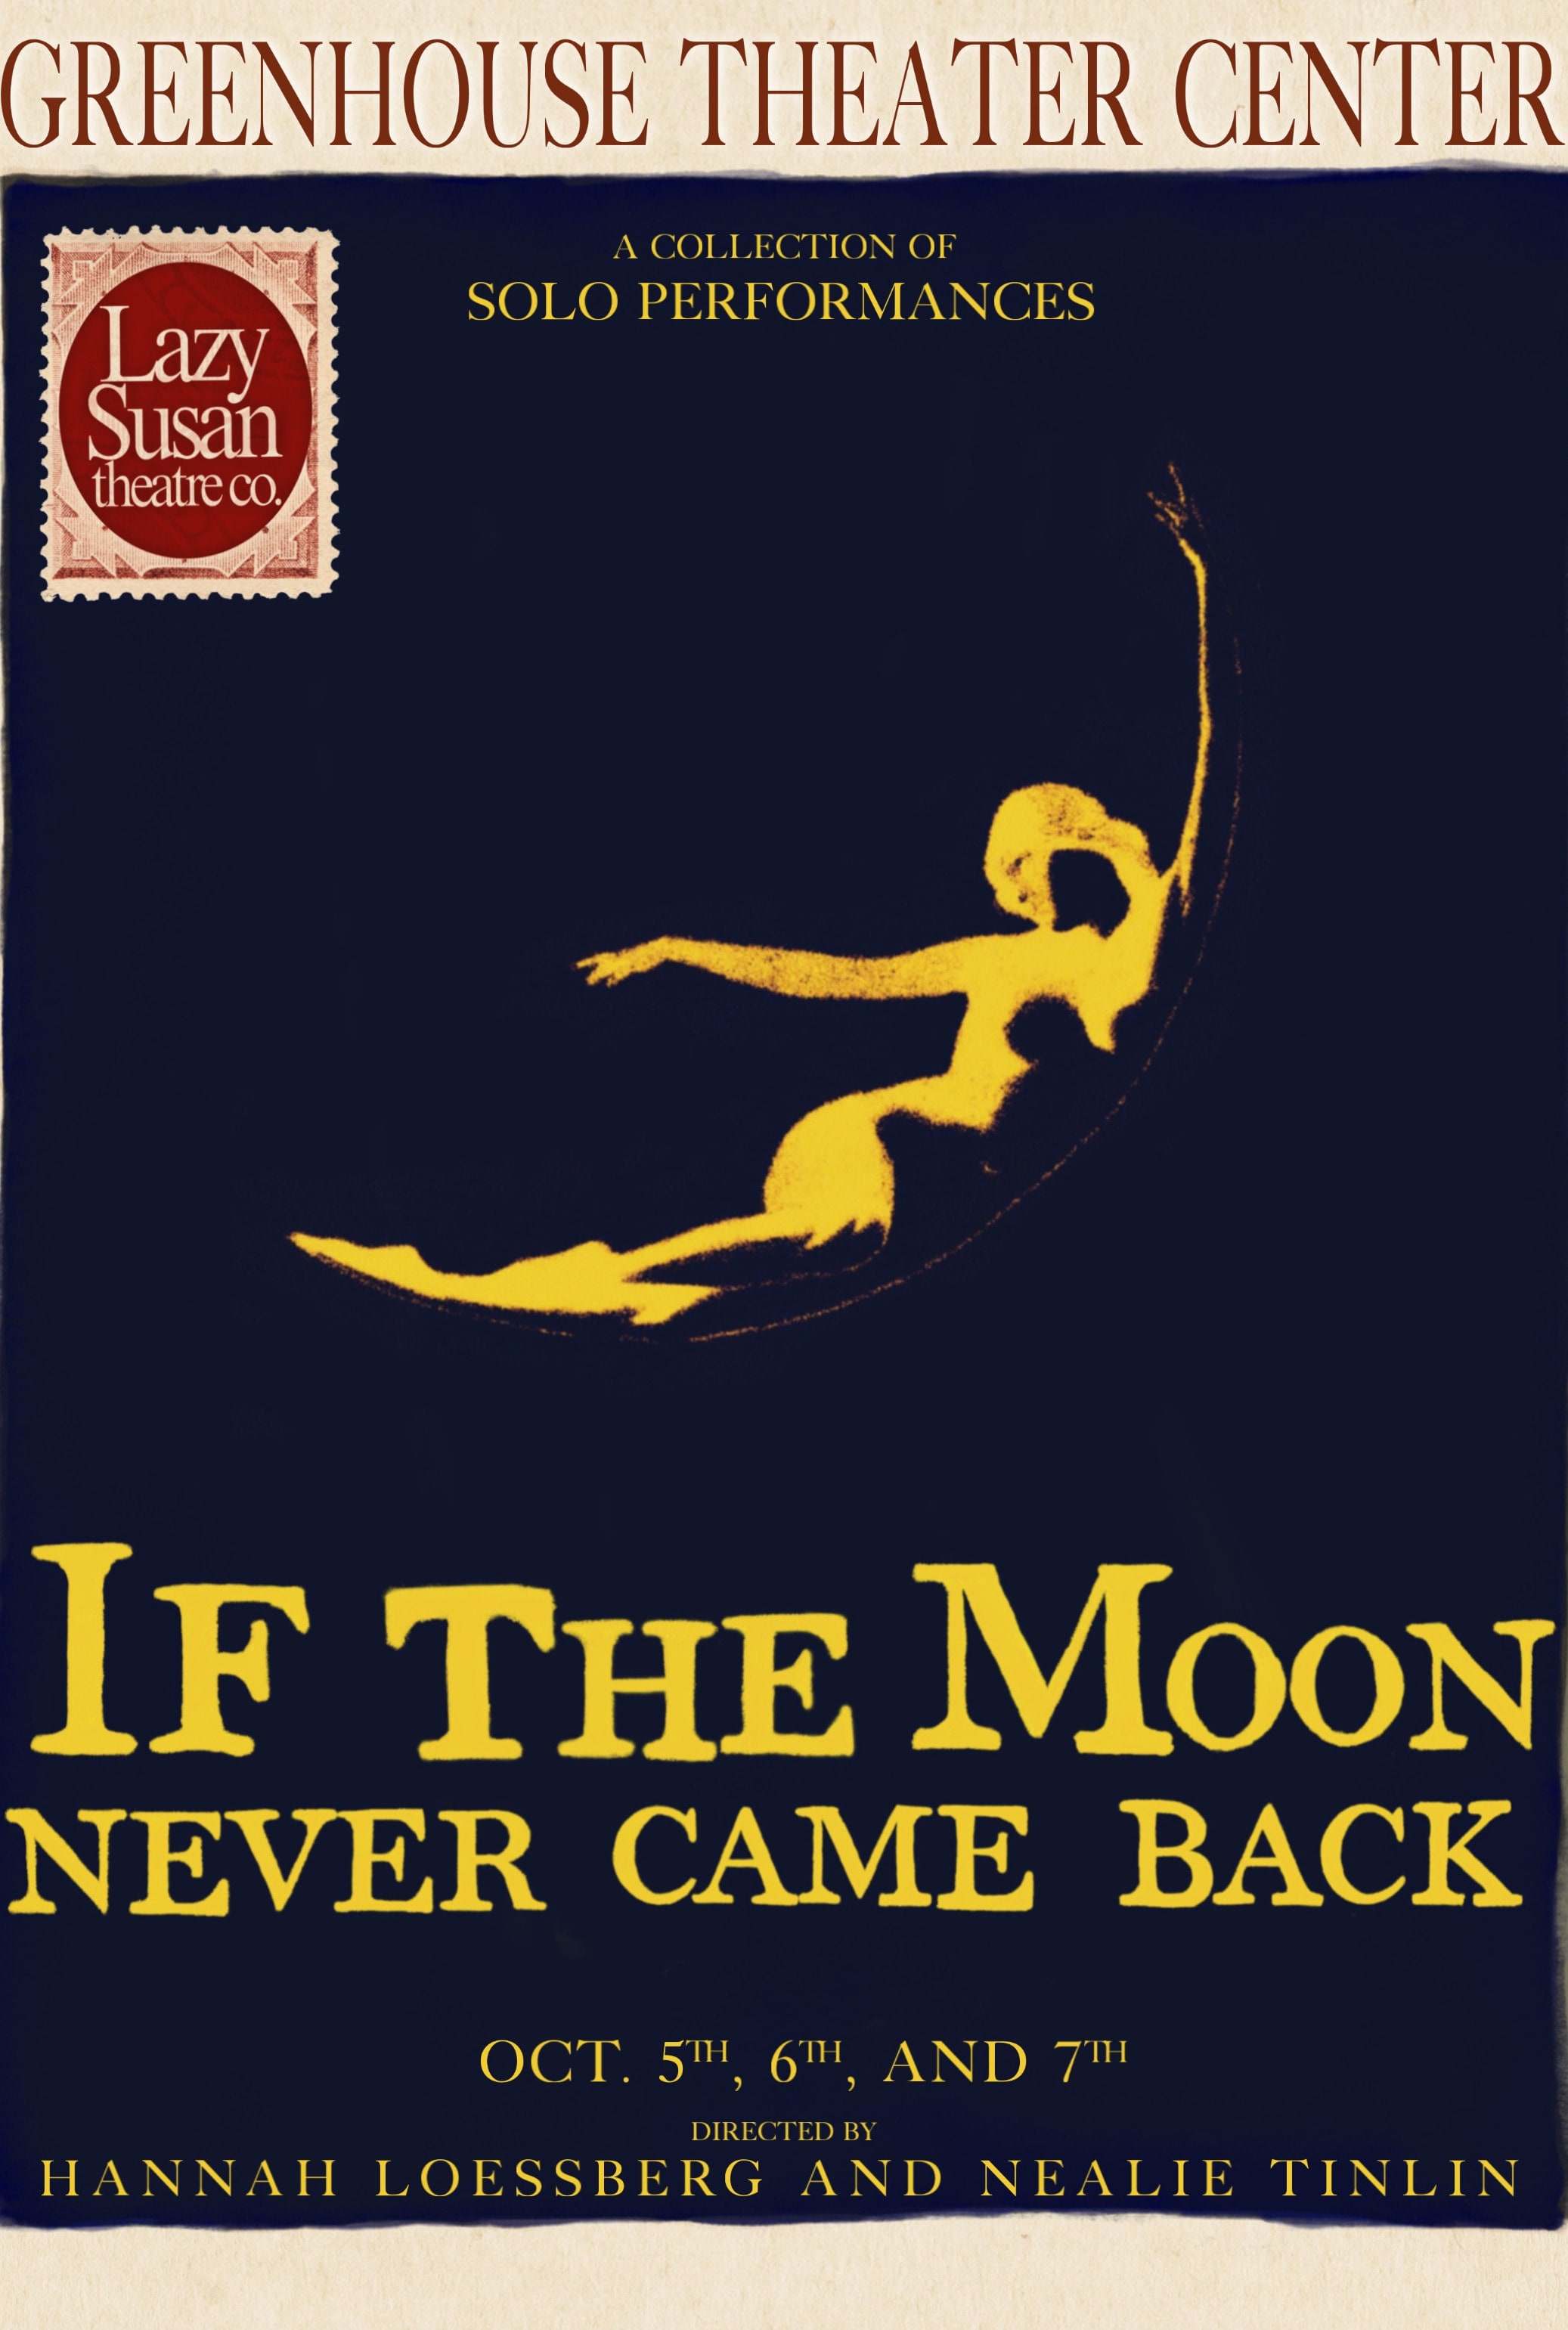 If the Moon Never Came Back show poster